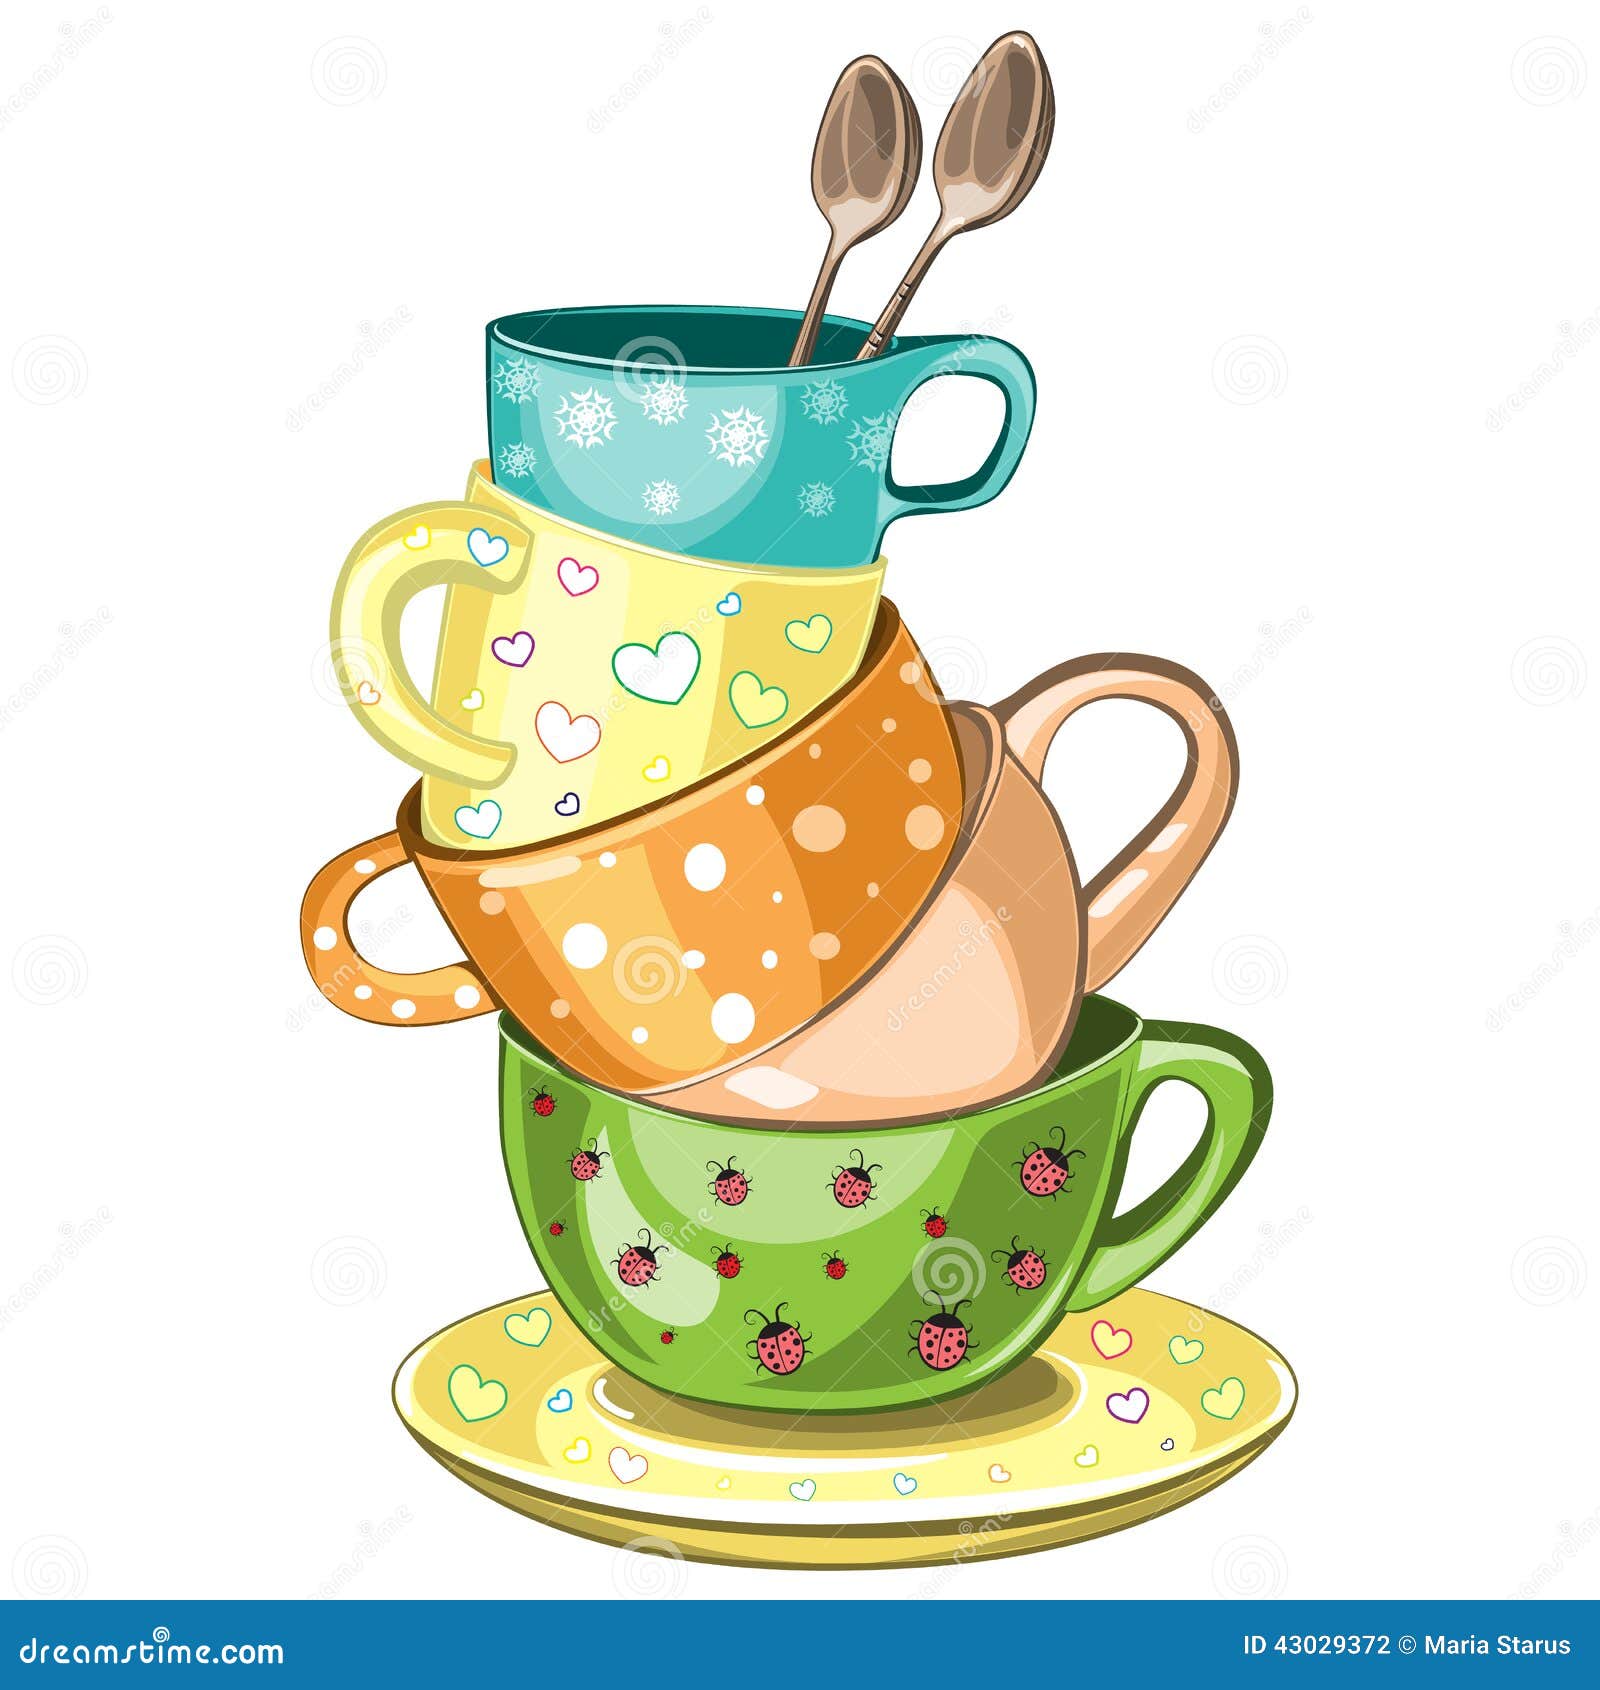 clip art cup stacking - photo #11